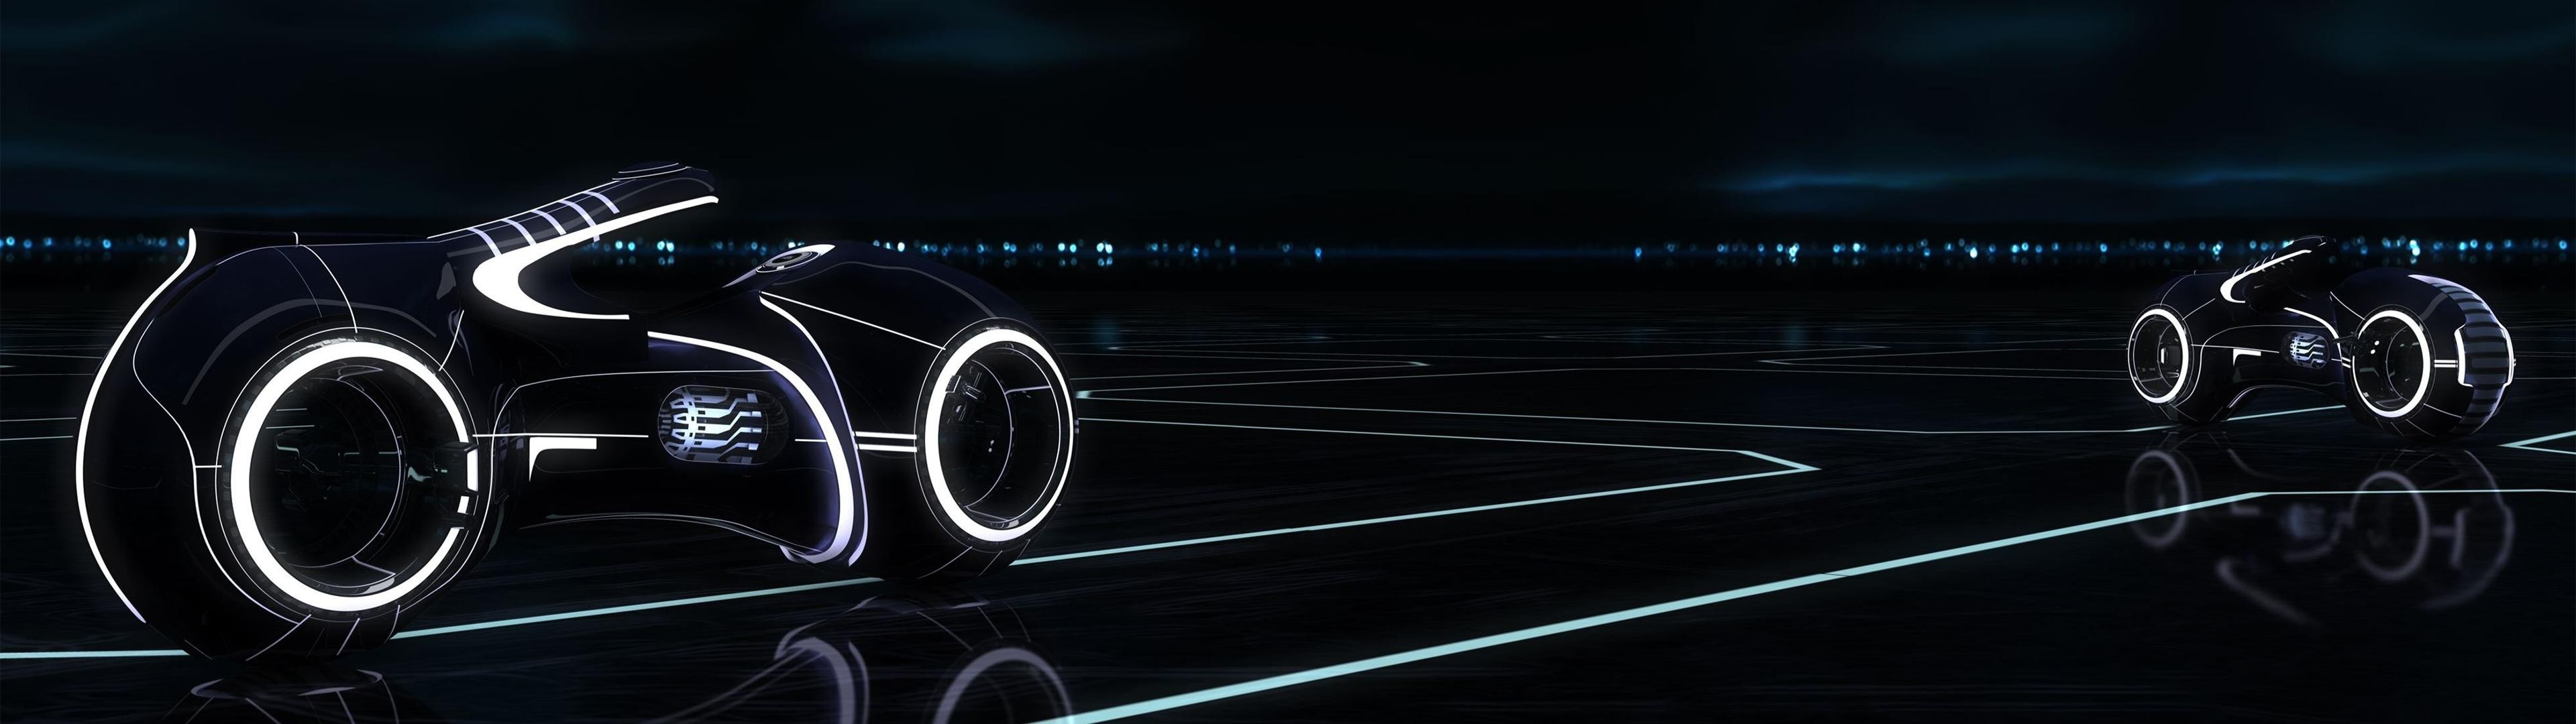 Tron: Legacy, Light Cycle, Movies, Multiple Display Wallpaper